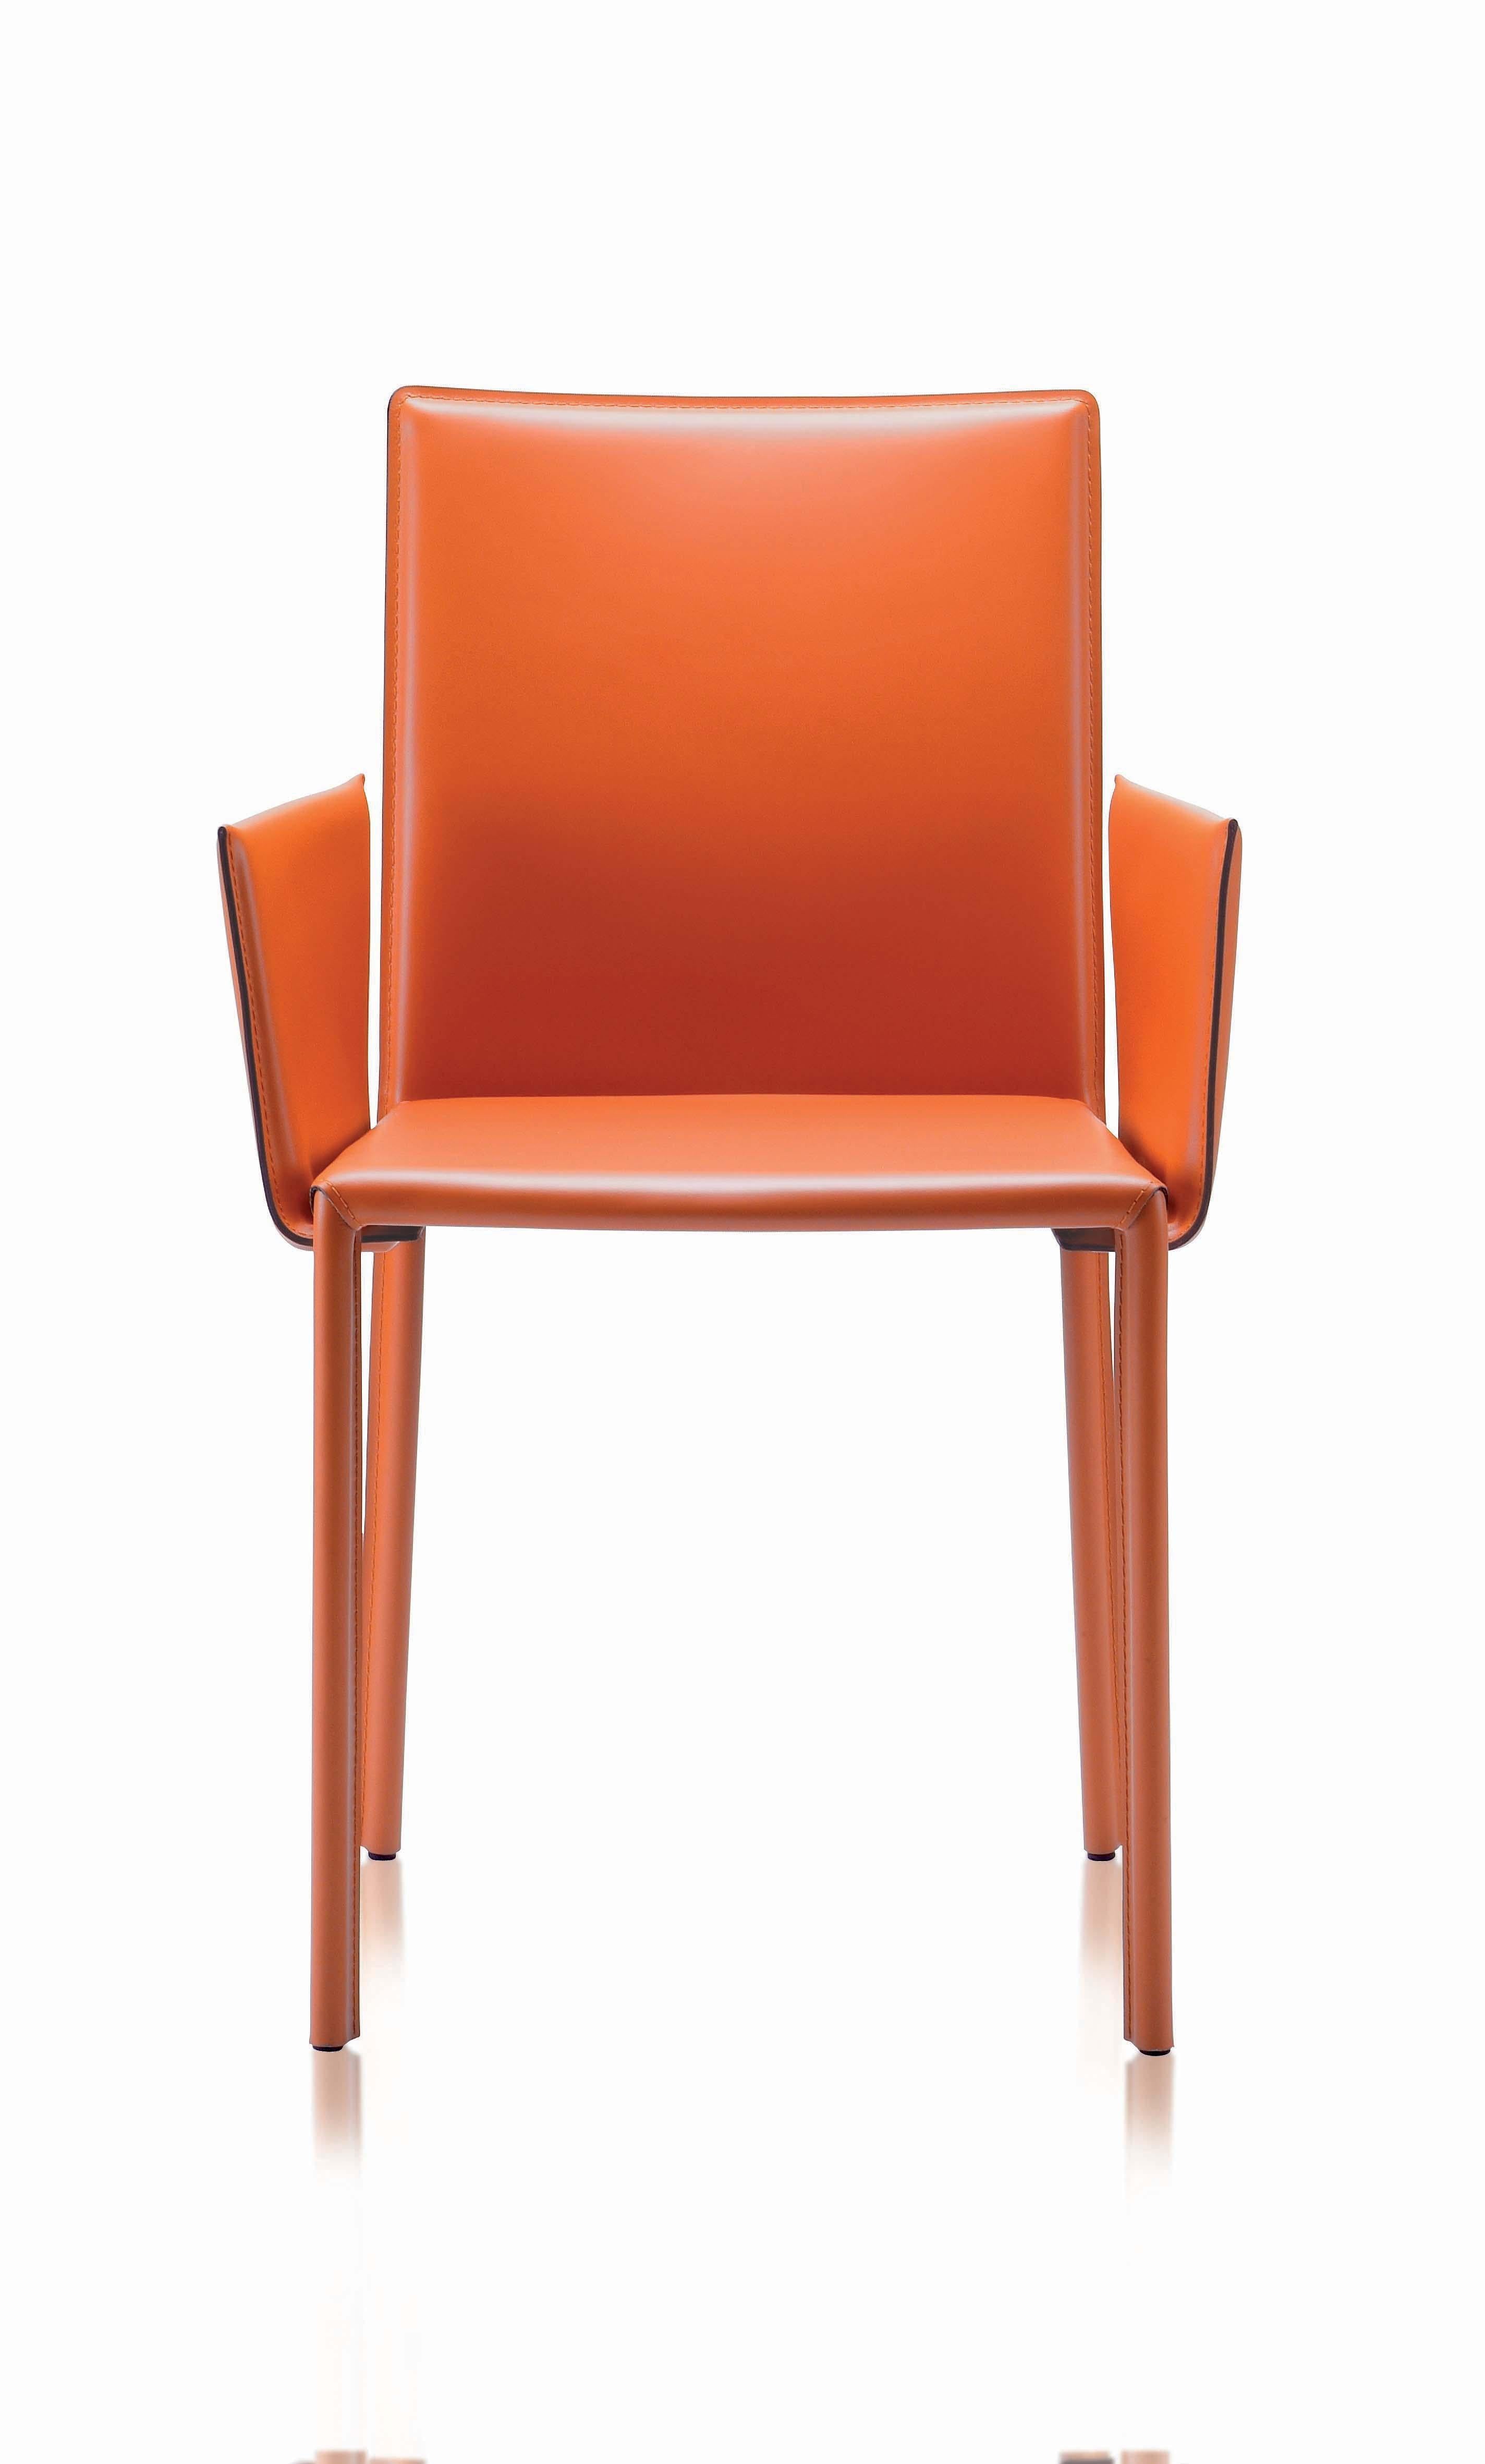 An unusual classic. Elegant and comfortable. The new color variants of this chair evoke the ambiance of the cafe society. A new edition of the model originally designed by Adolf Loos, with an austere steam bentwood beech design that slims the